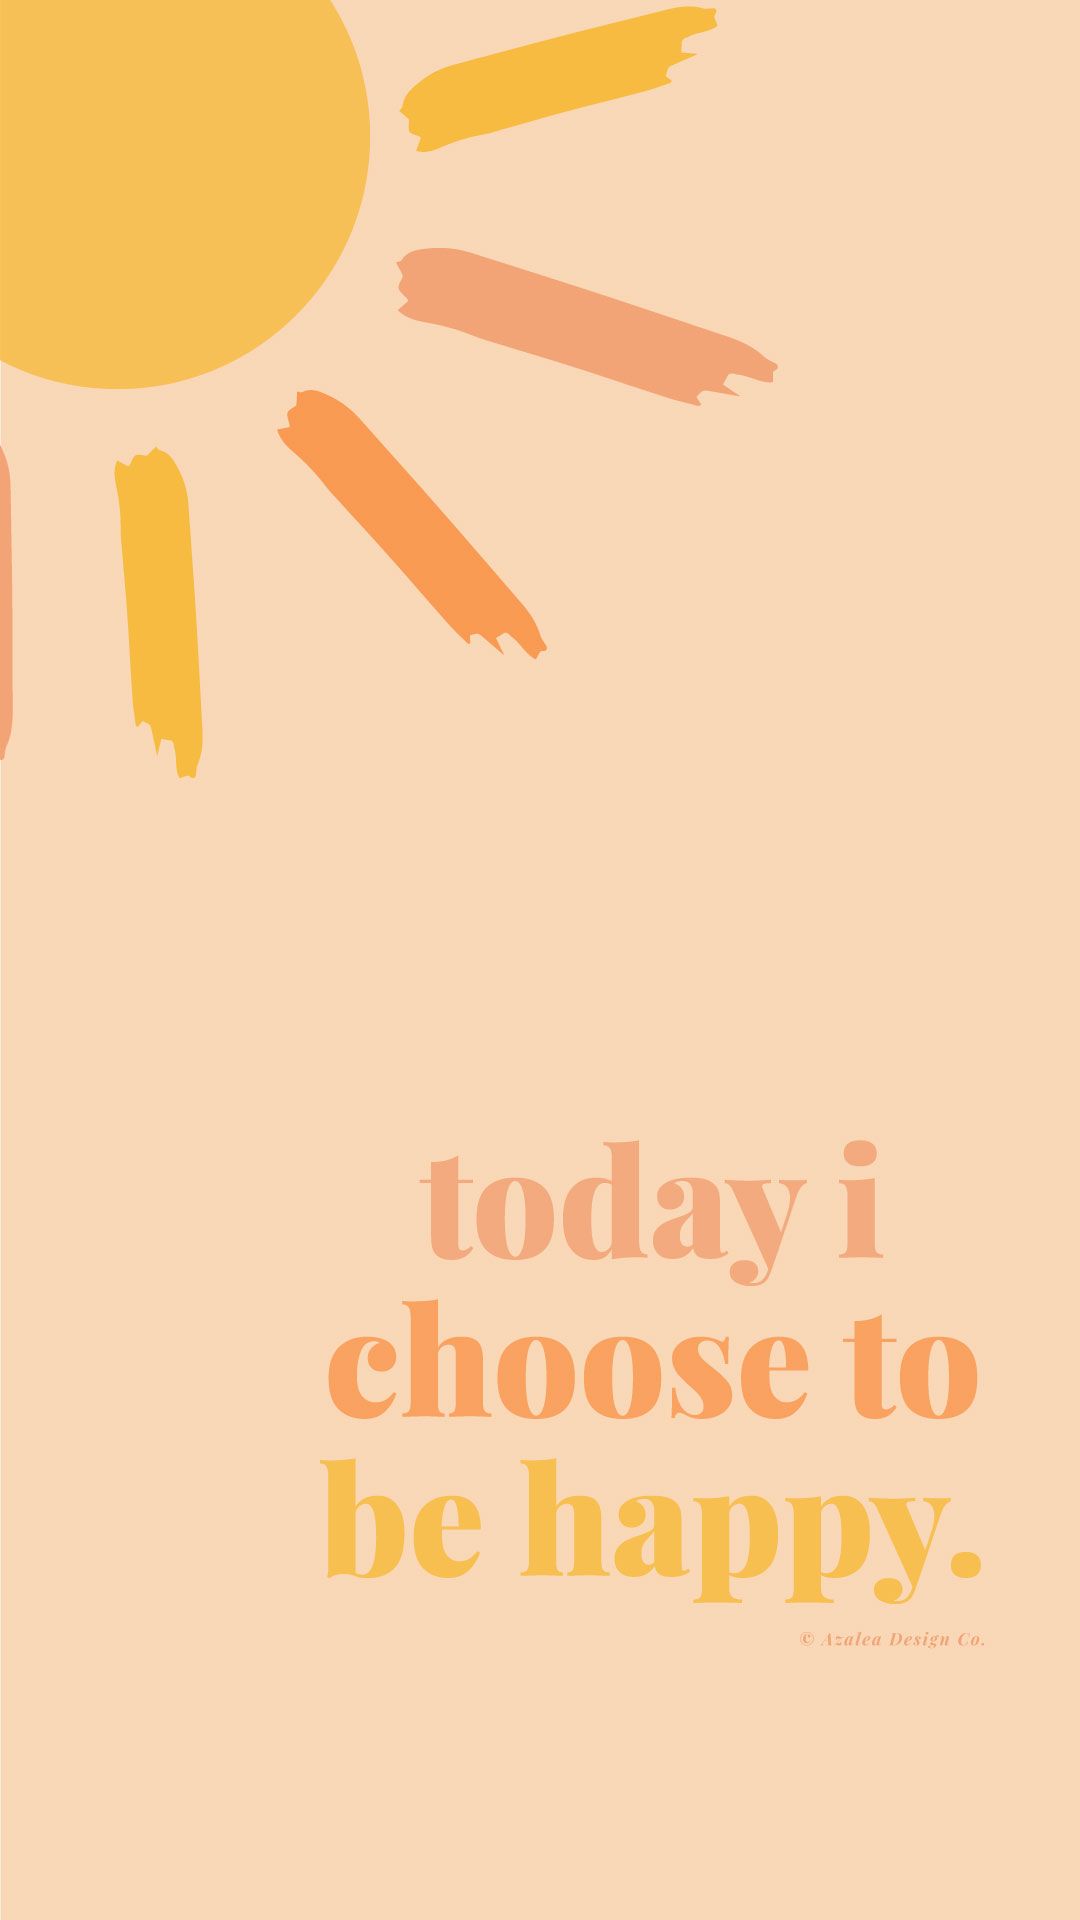 Today I choose to be happy. Positive affirmation. Desktop background quote, Choose happy, Quote background